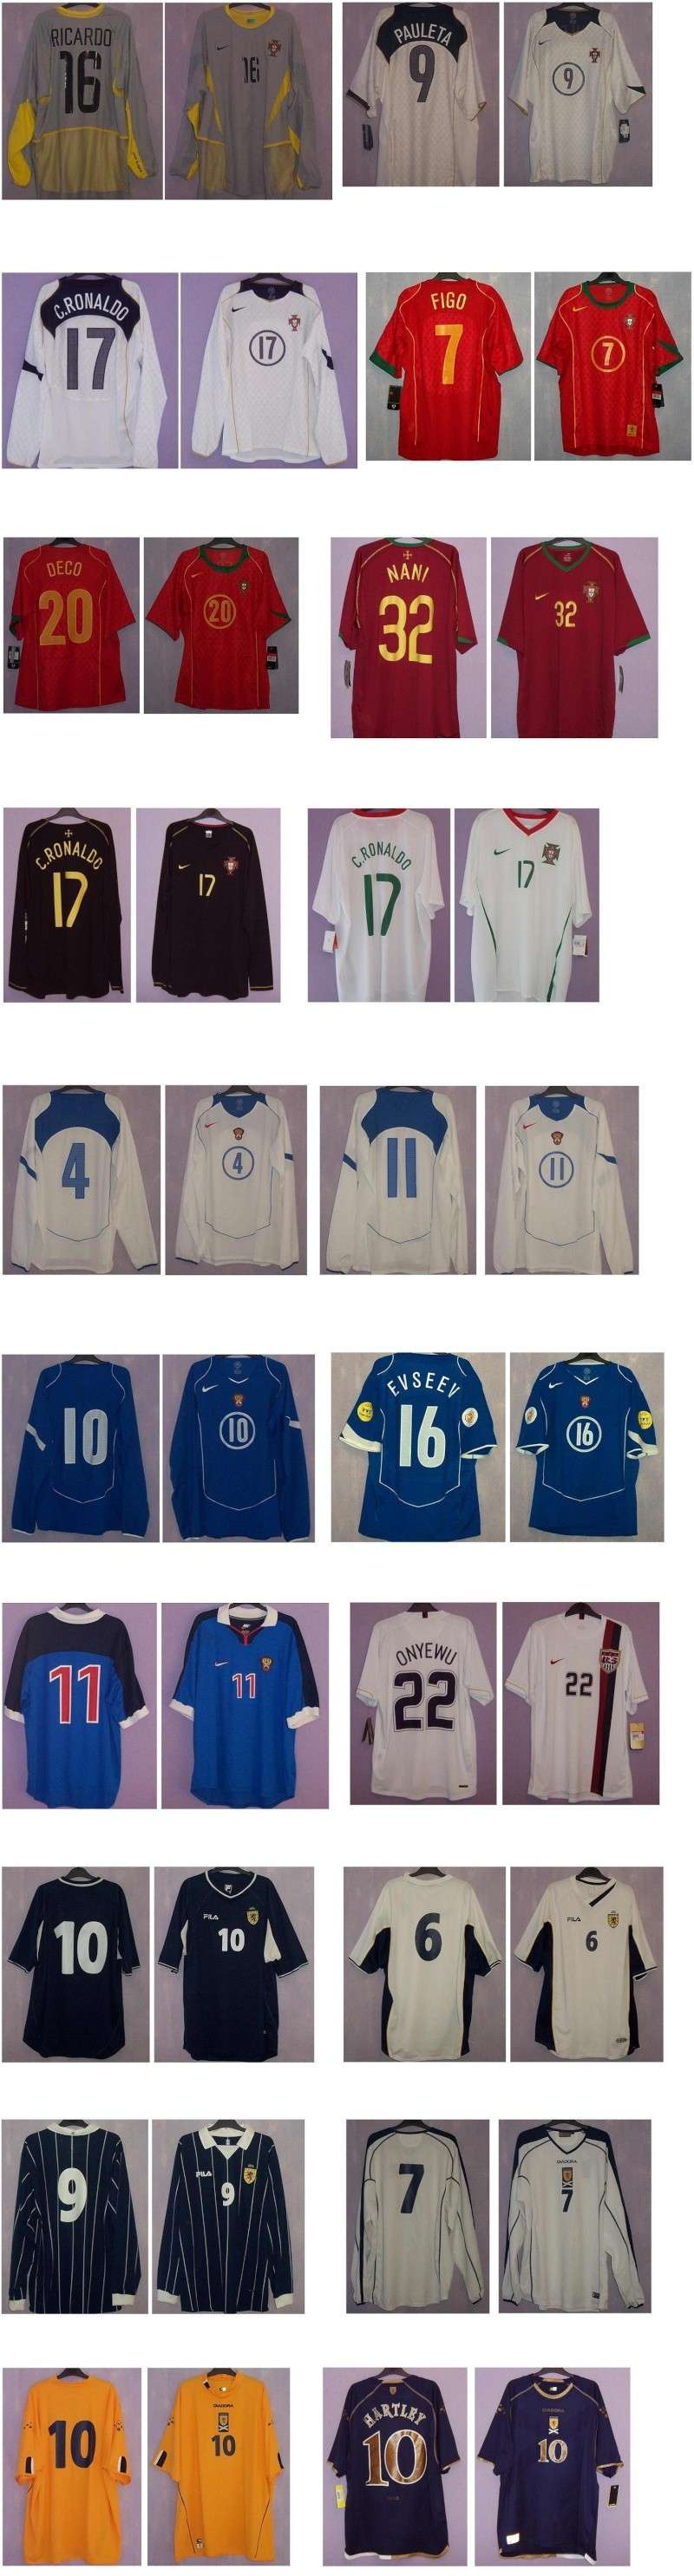 treble 1999 shirt collection - Page 3 Portsc10